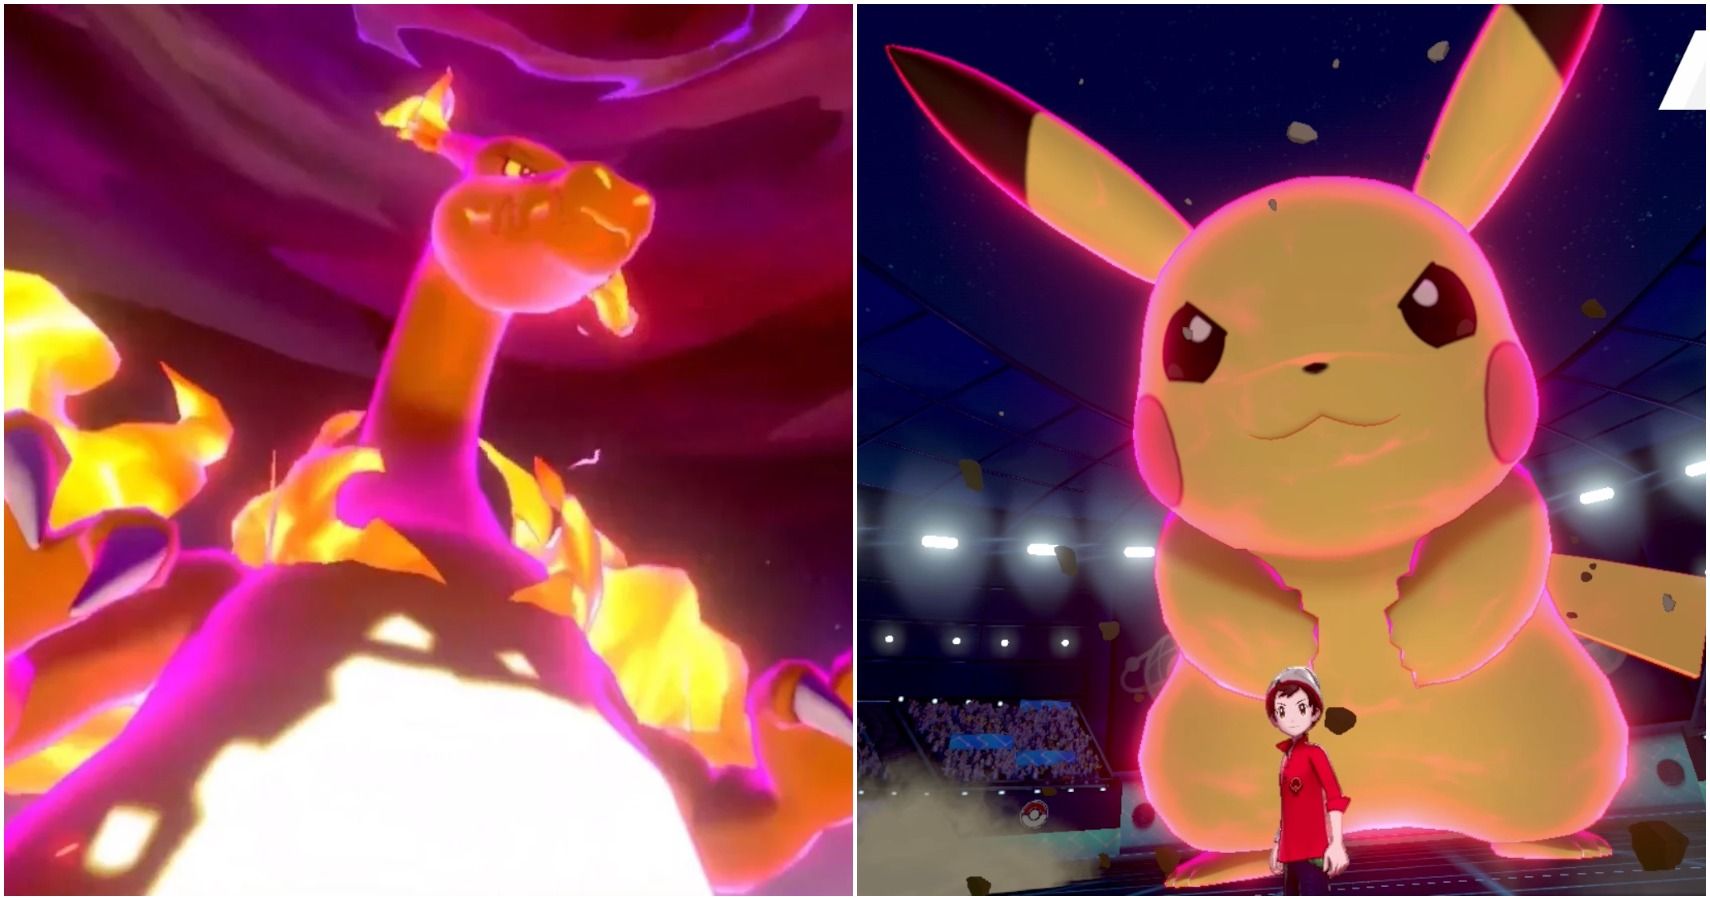 Pokémon Sword and Shield' Gigantamax Toxtricity guide: Release date and how  to catch the powerful monster